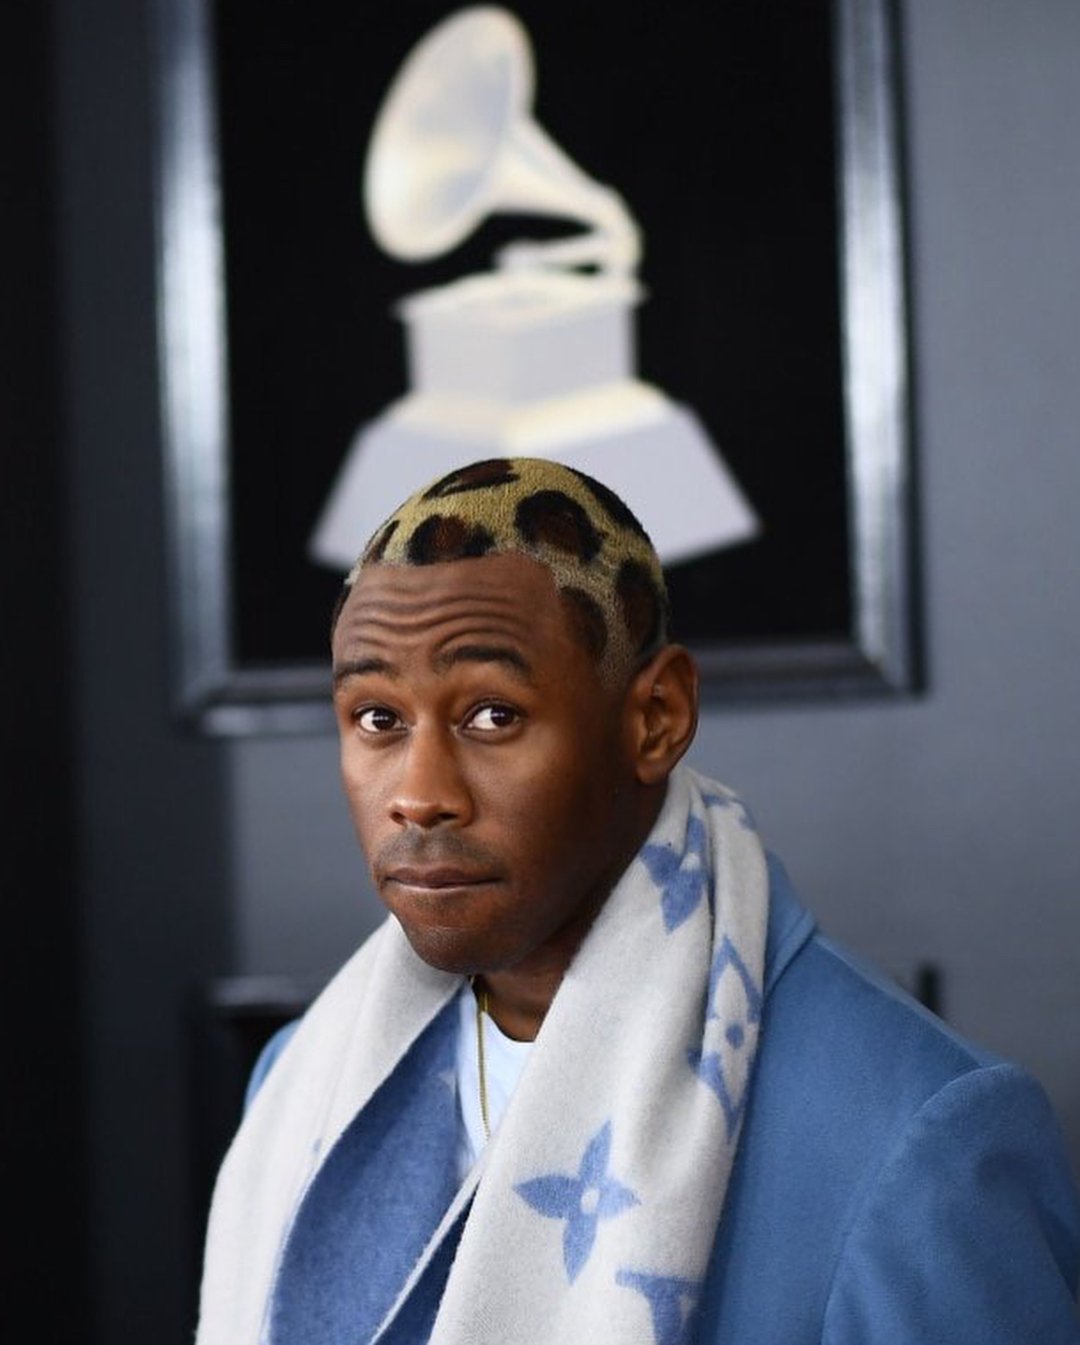 The Fashion Court on X: Tyler the Creator topped off his baby blue look  with a #LouisVuitton scarf and leopard print hair at the 2018 Grammy  Awards. #Grammys.  #Grammys2018   /